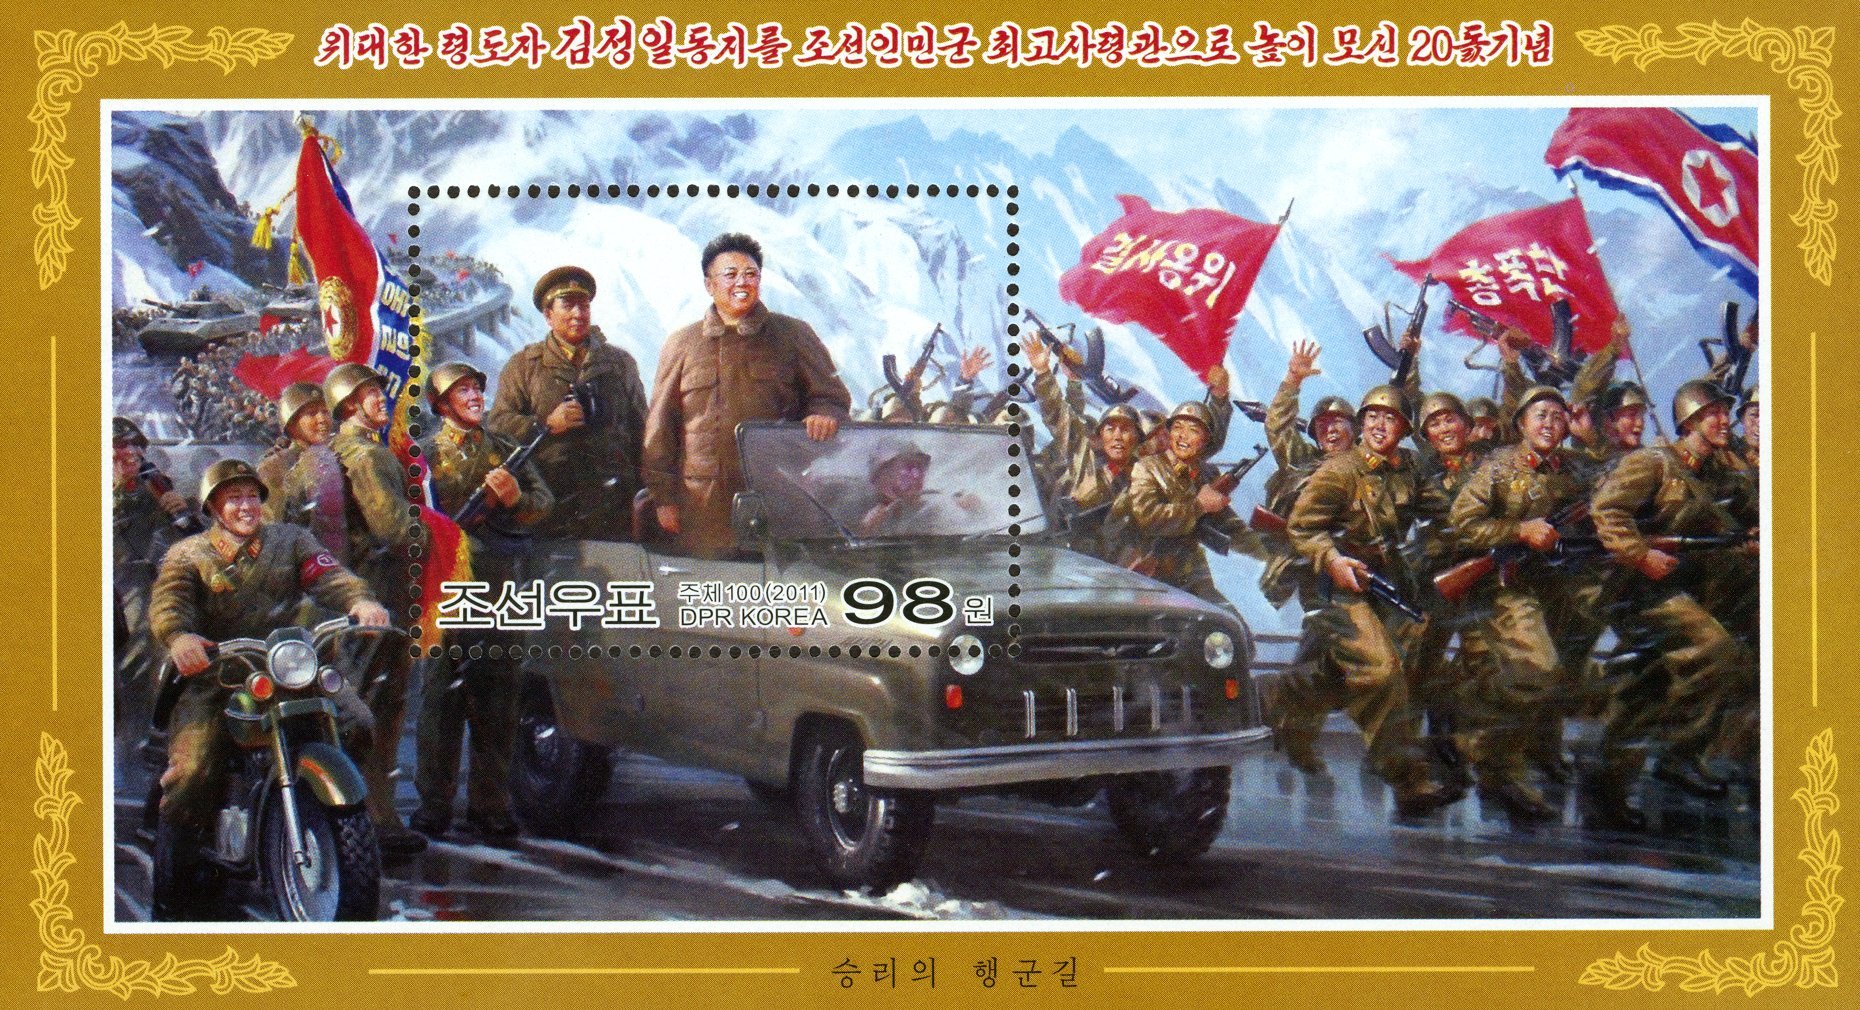 Kim Jong-il, with short black hair, glasses, and a brown suit, stands atop a moving truck while military men in fatigues, holding guns, celebrate and wave North Korean flags.